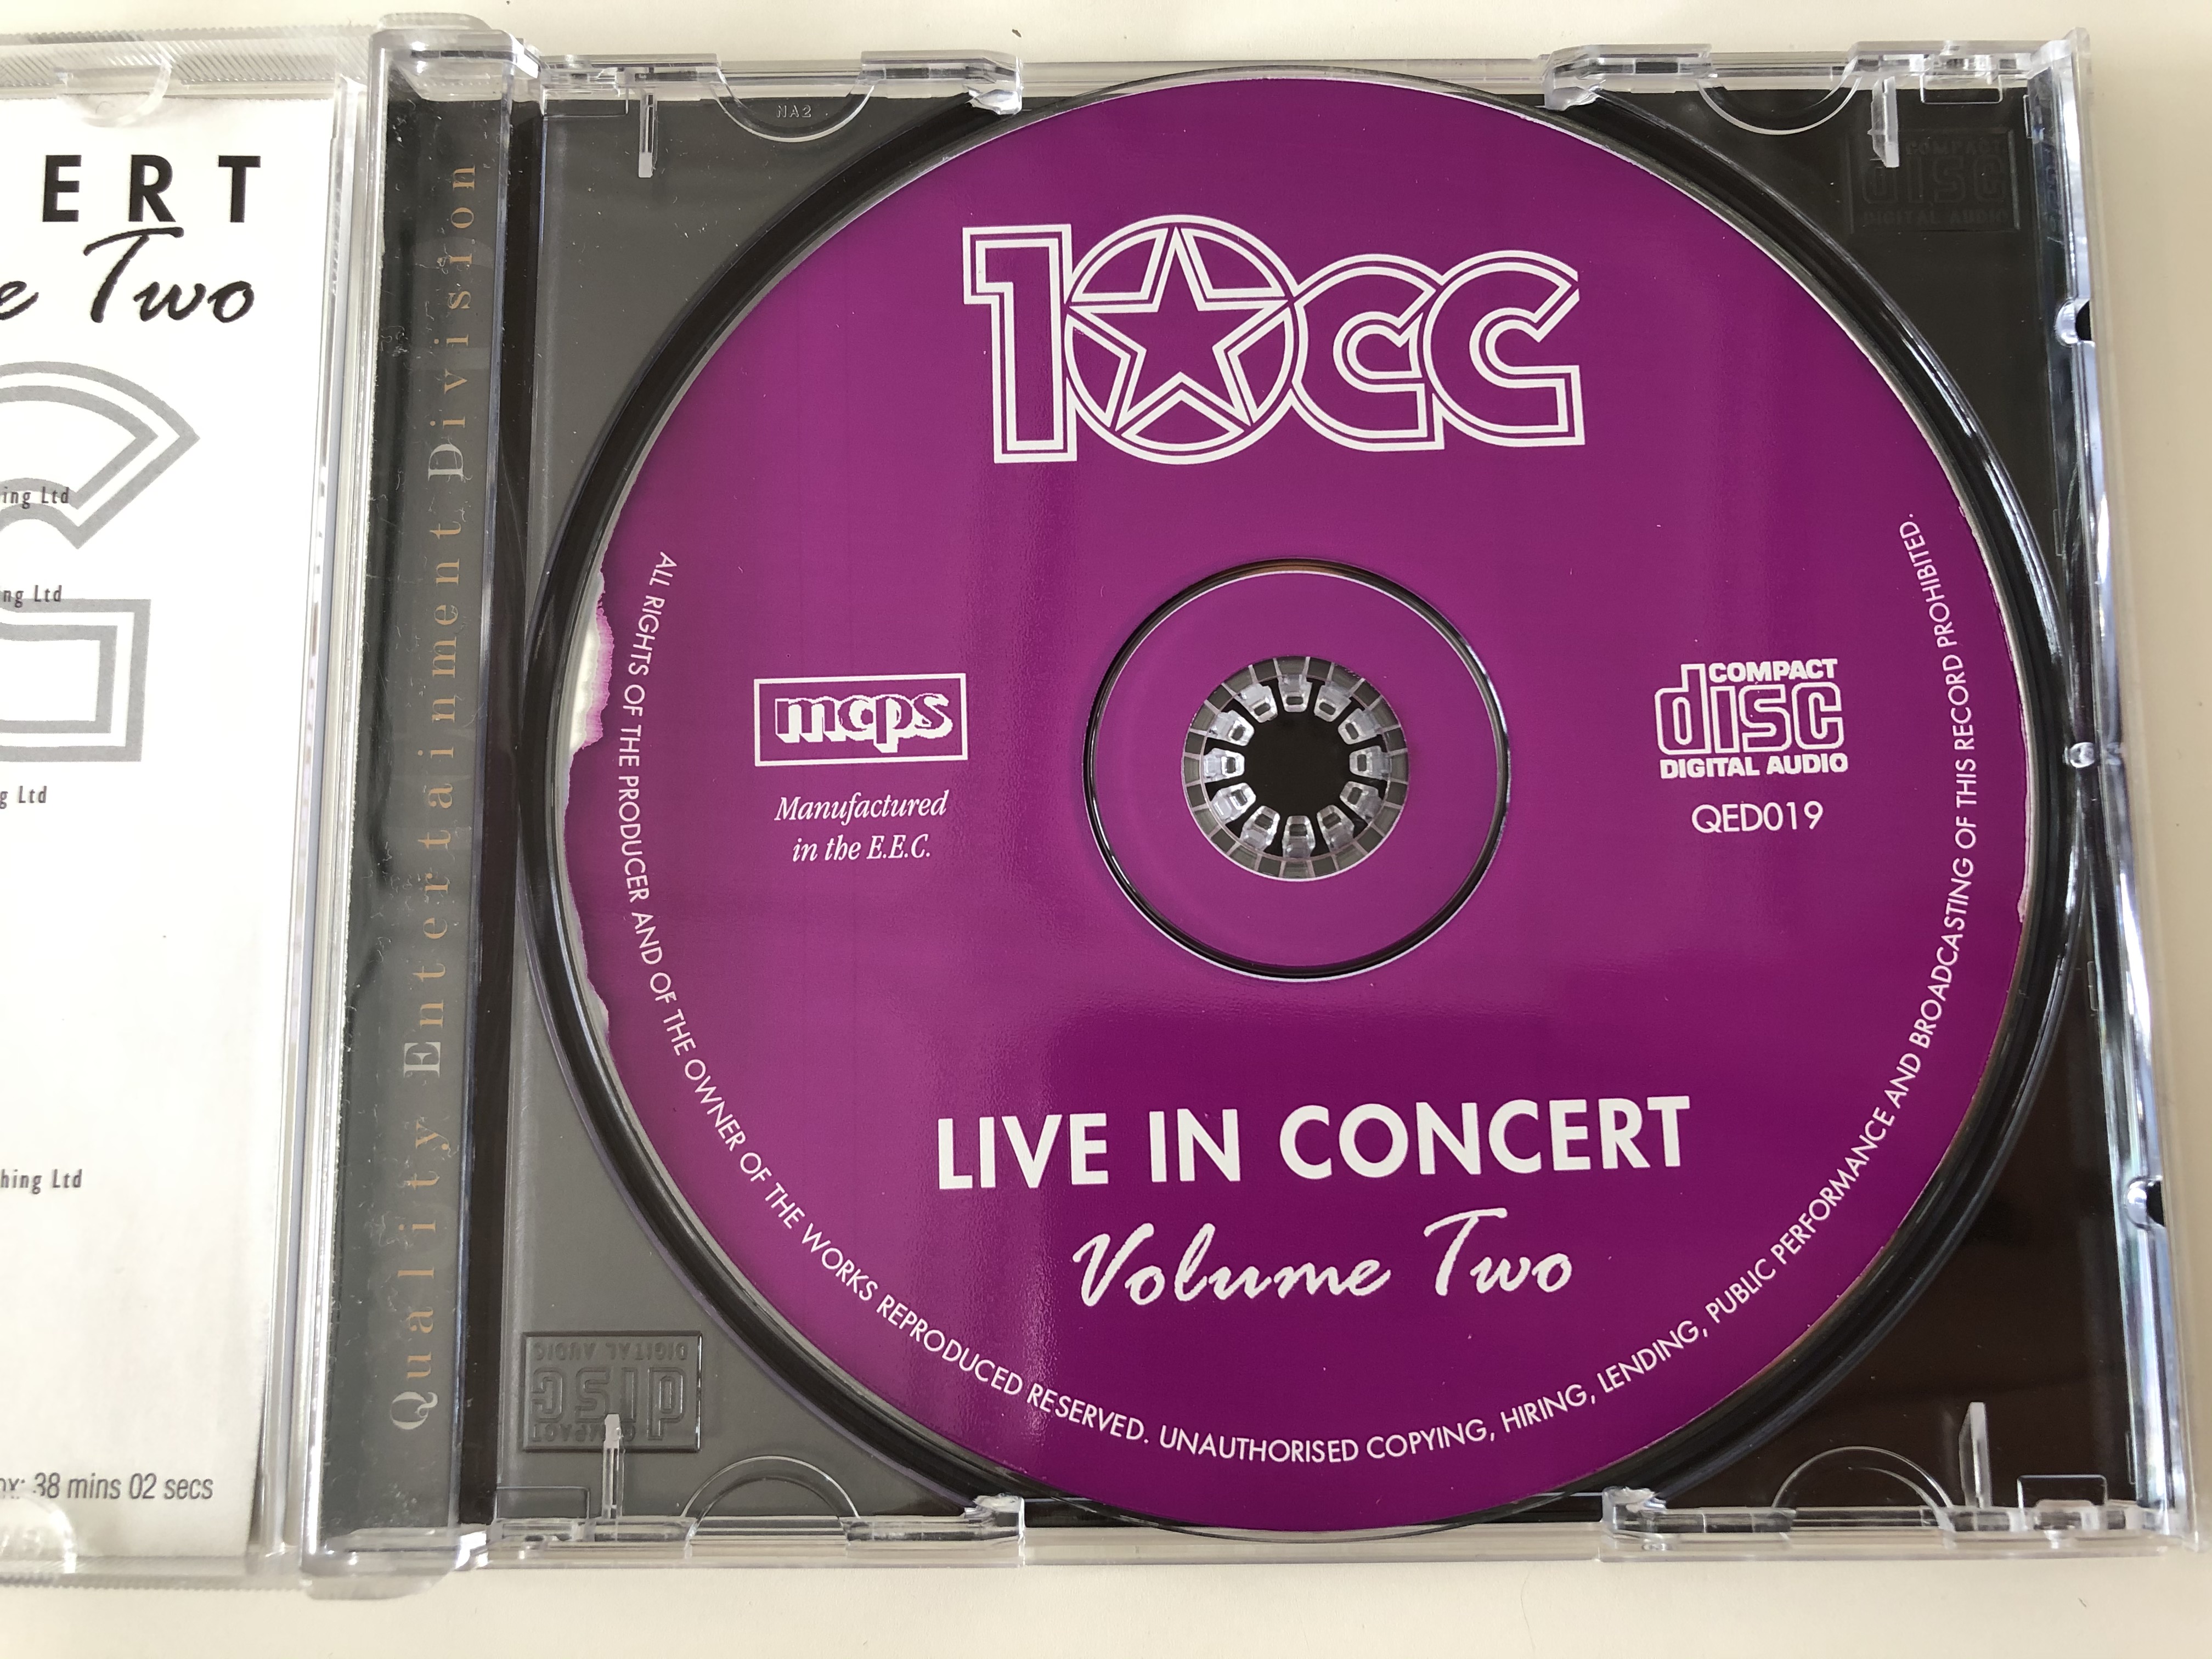 live-in-concert-volume-two-10cc-qed-audio-cd-qed019-3-.jpg